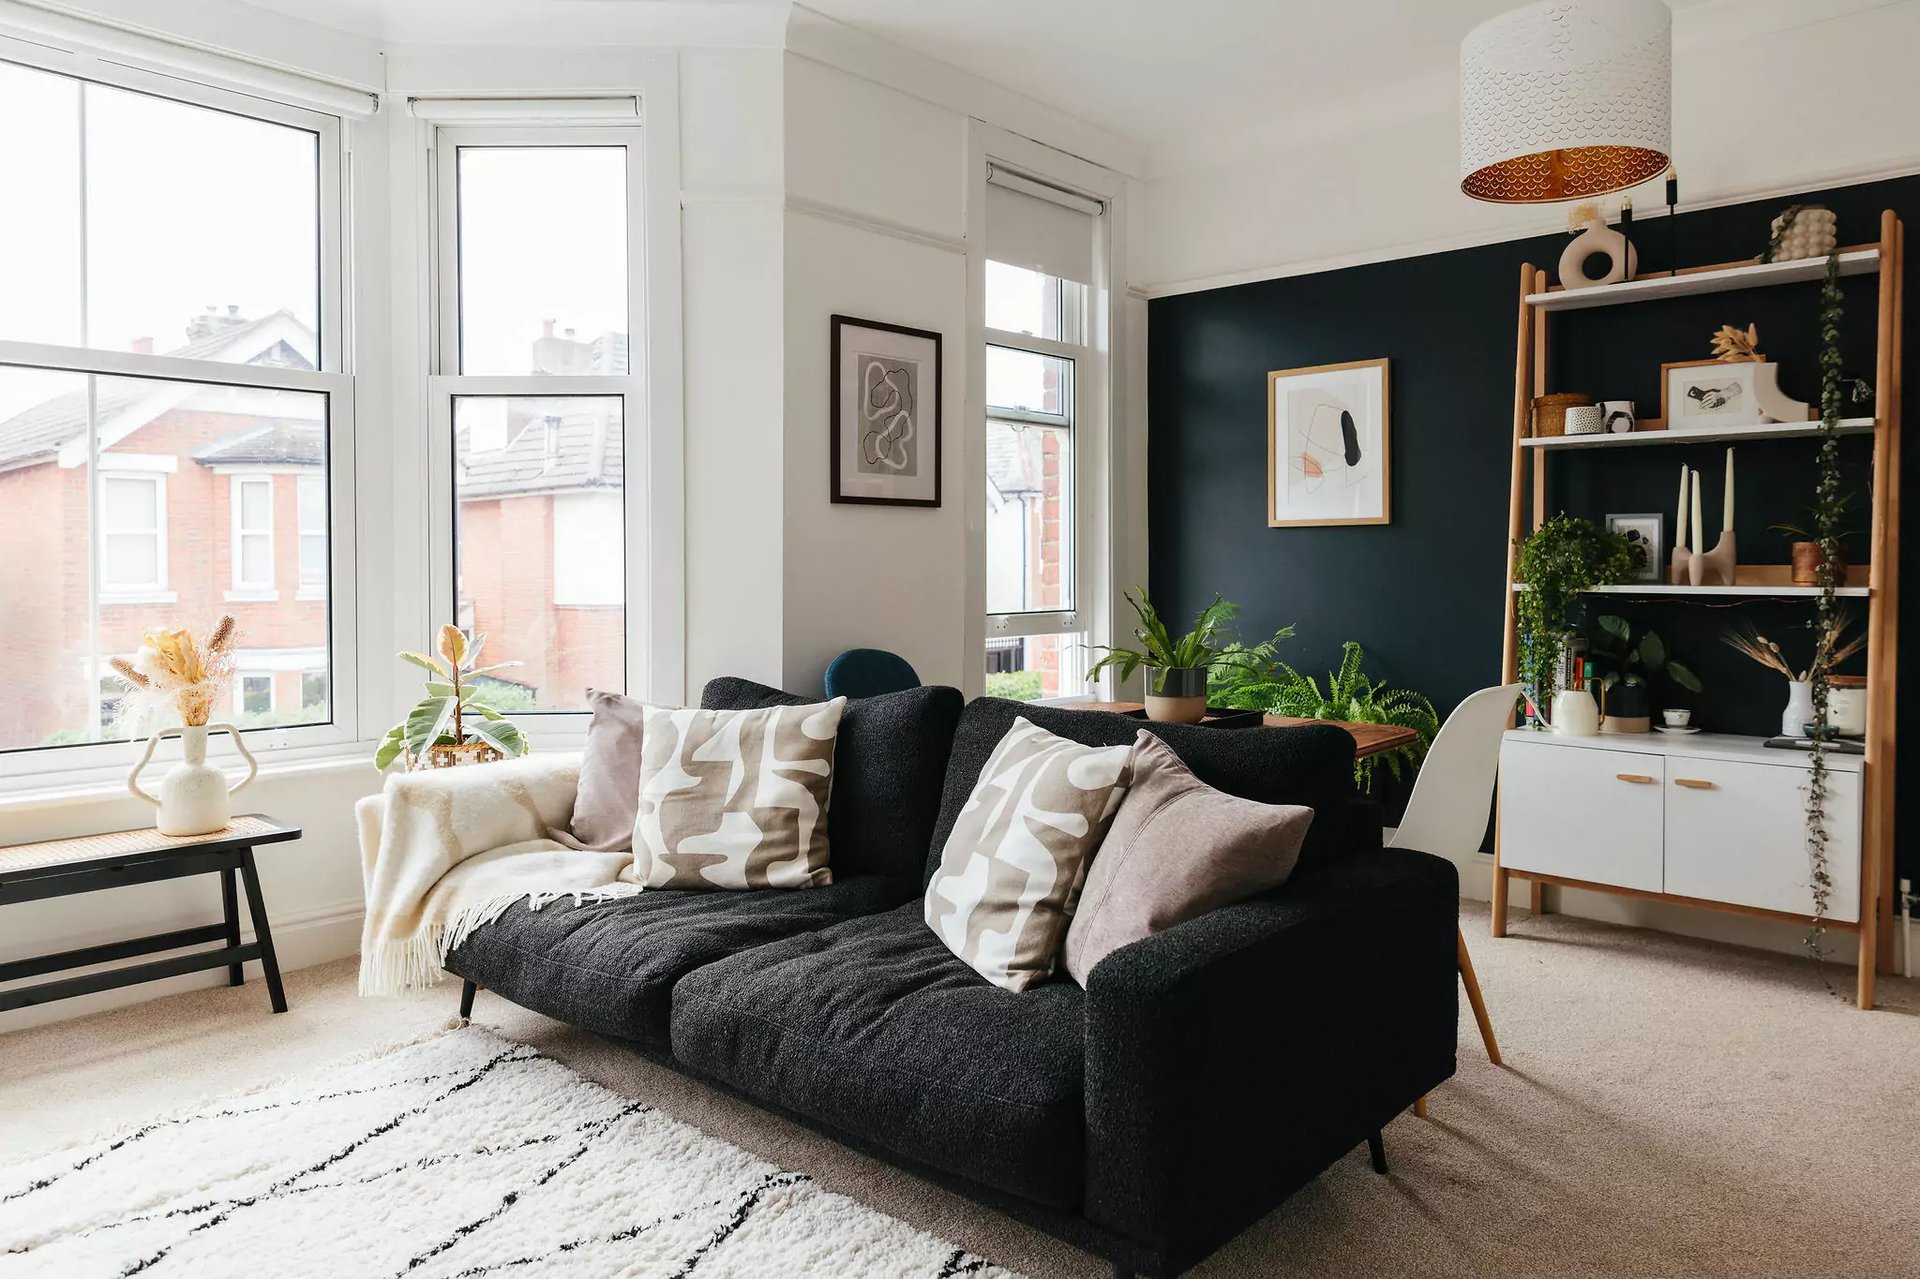 Monochrome living room with house plants